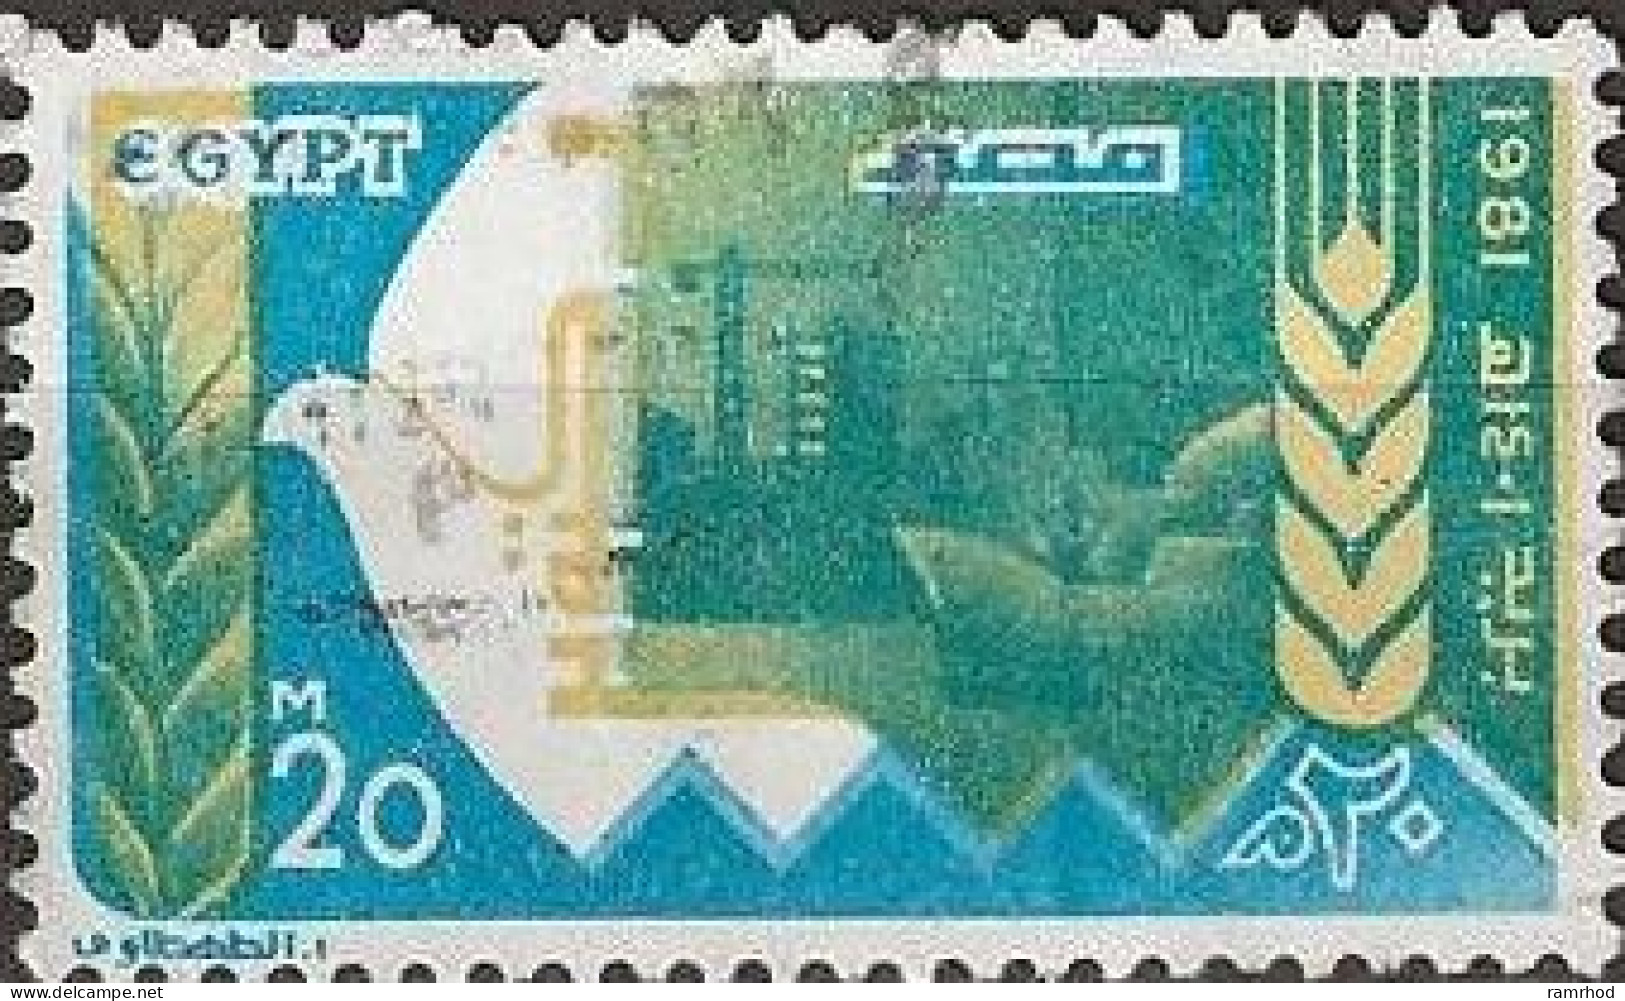 EGYPT 1981 Eighth Anniversary Of Suez Crossing - 20m - Olive, Dove, Canal And Wheat FU - Used Stamps